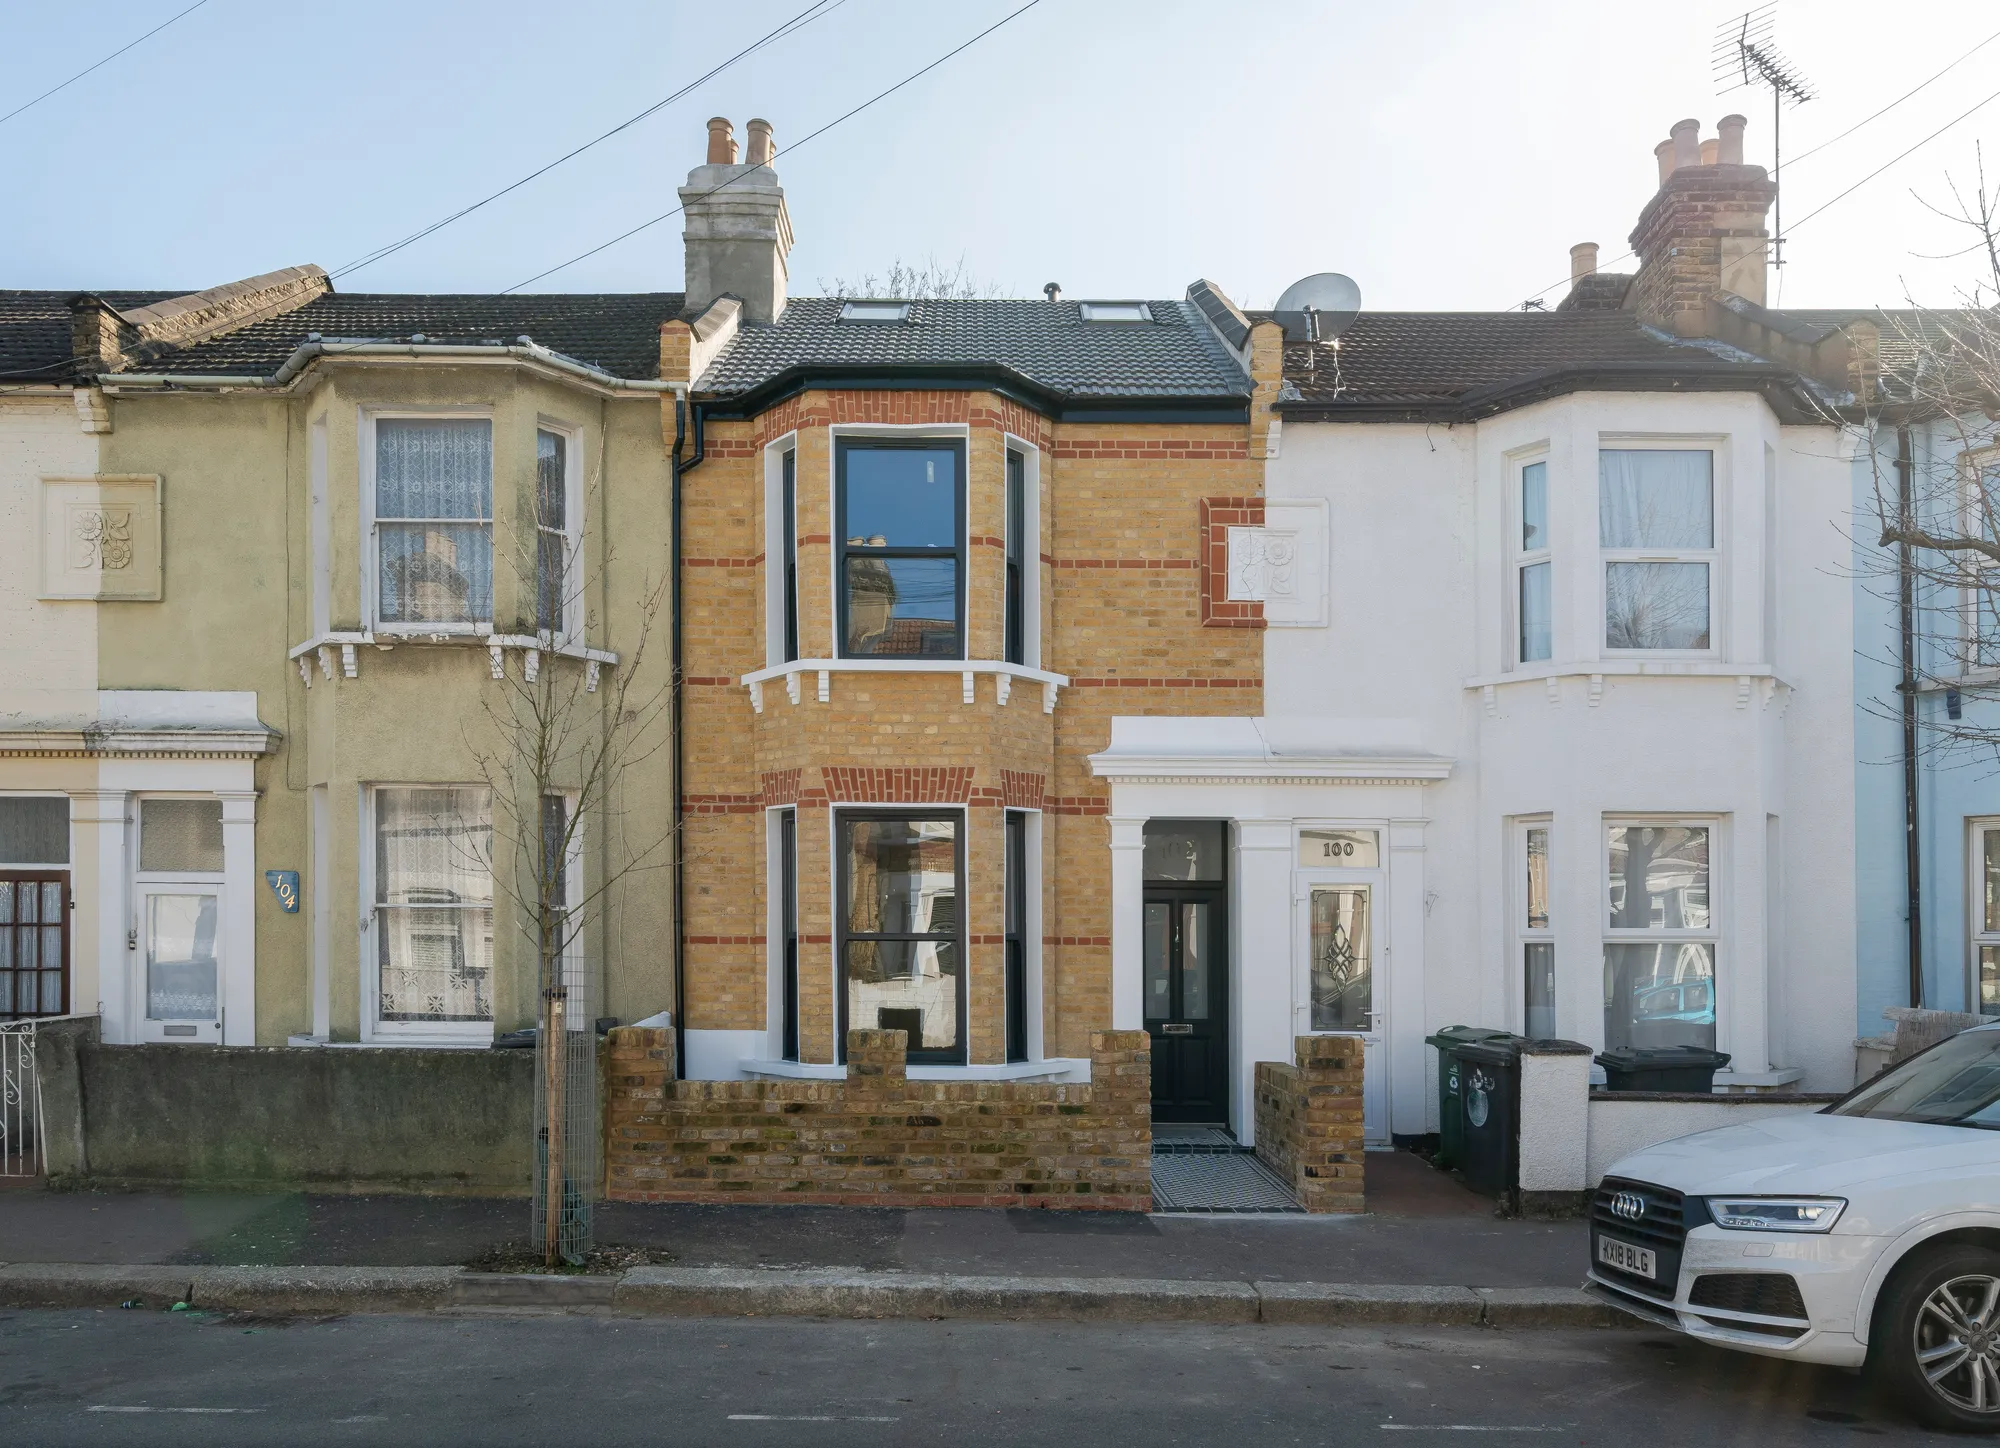 4 bed mid-terraced house for sale in St. Georges Road, Leyton - Property Image 1